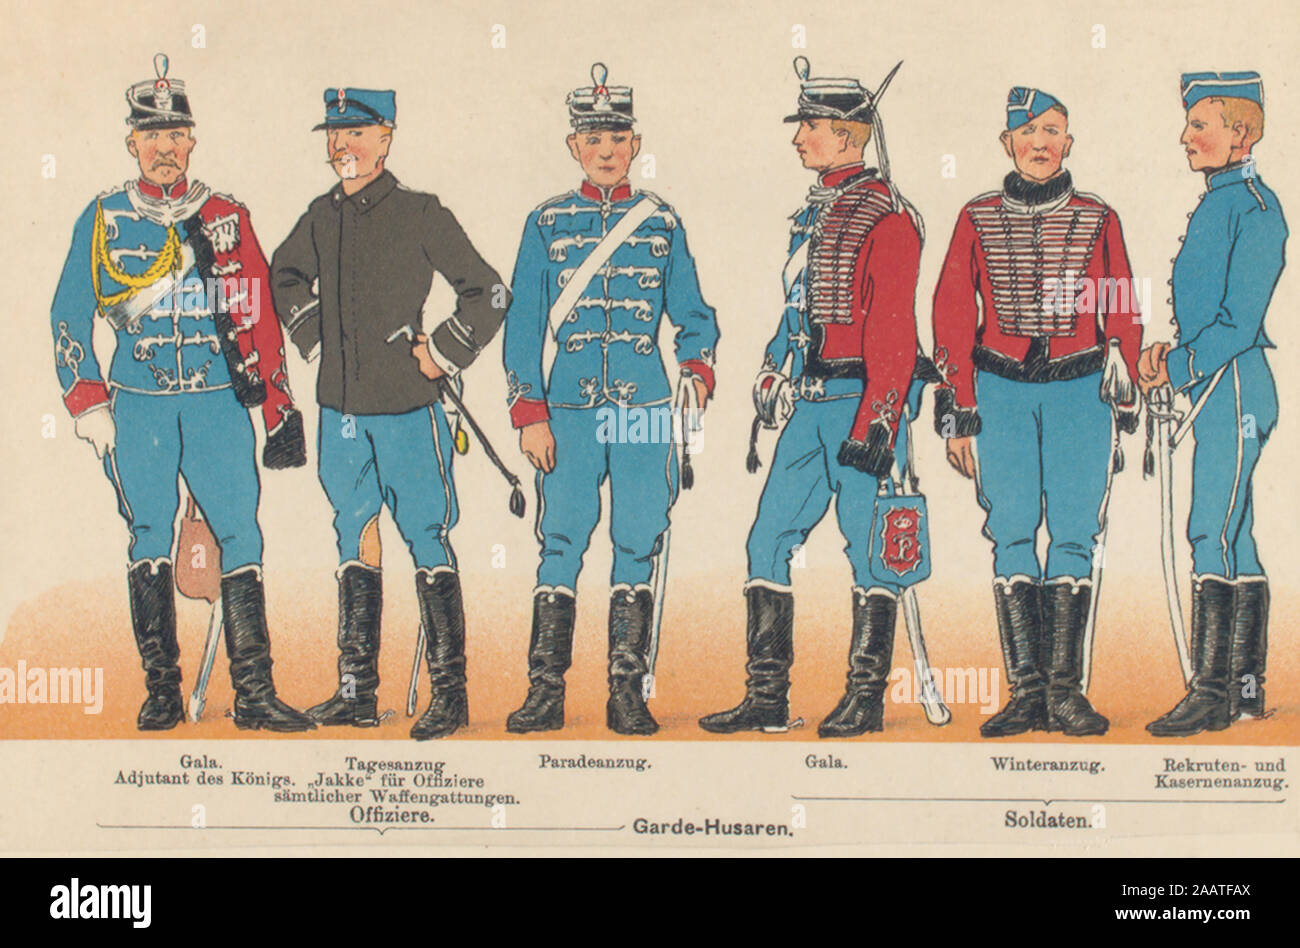 Denmark, 1867-95 Denmark, 1867-95. From left to right: Officers (Gala  aide-de-camp to the Monarch, Everyday jacket, parade), Enlisted (gala,  winter jacket, recruit and barracks dress); Denmark, 1867-95 Stock Photo -  Alamy